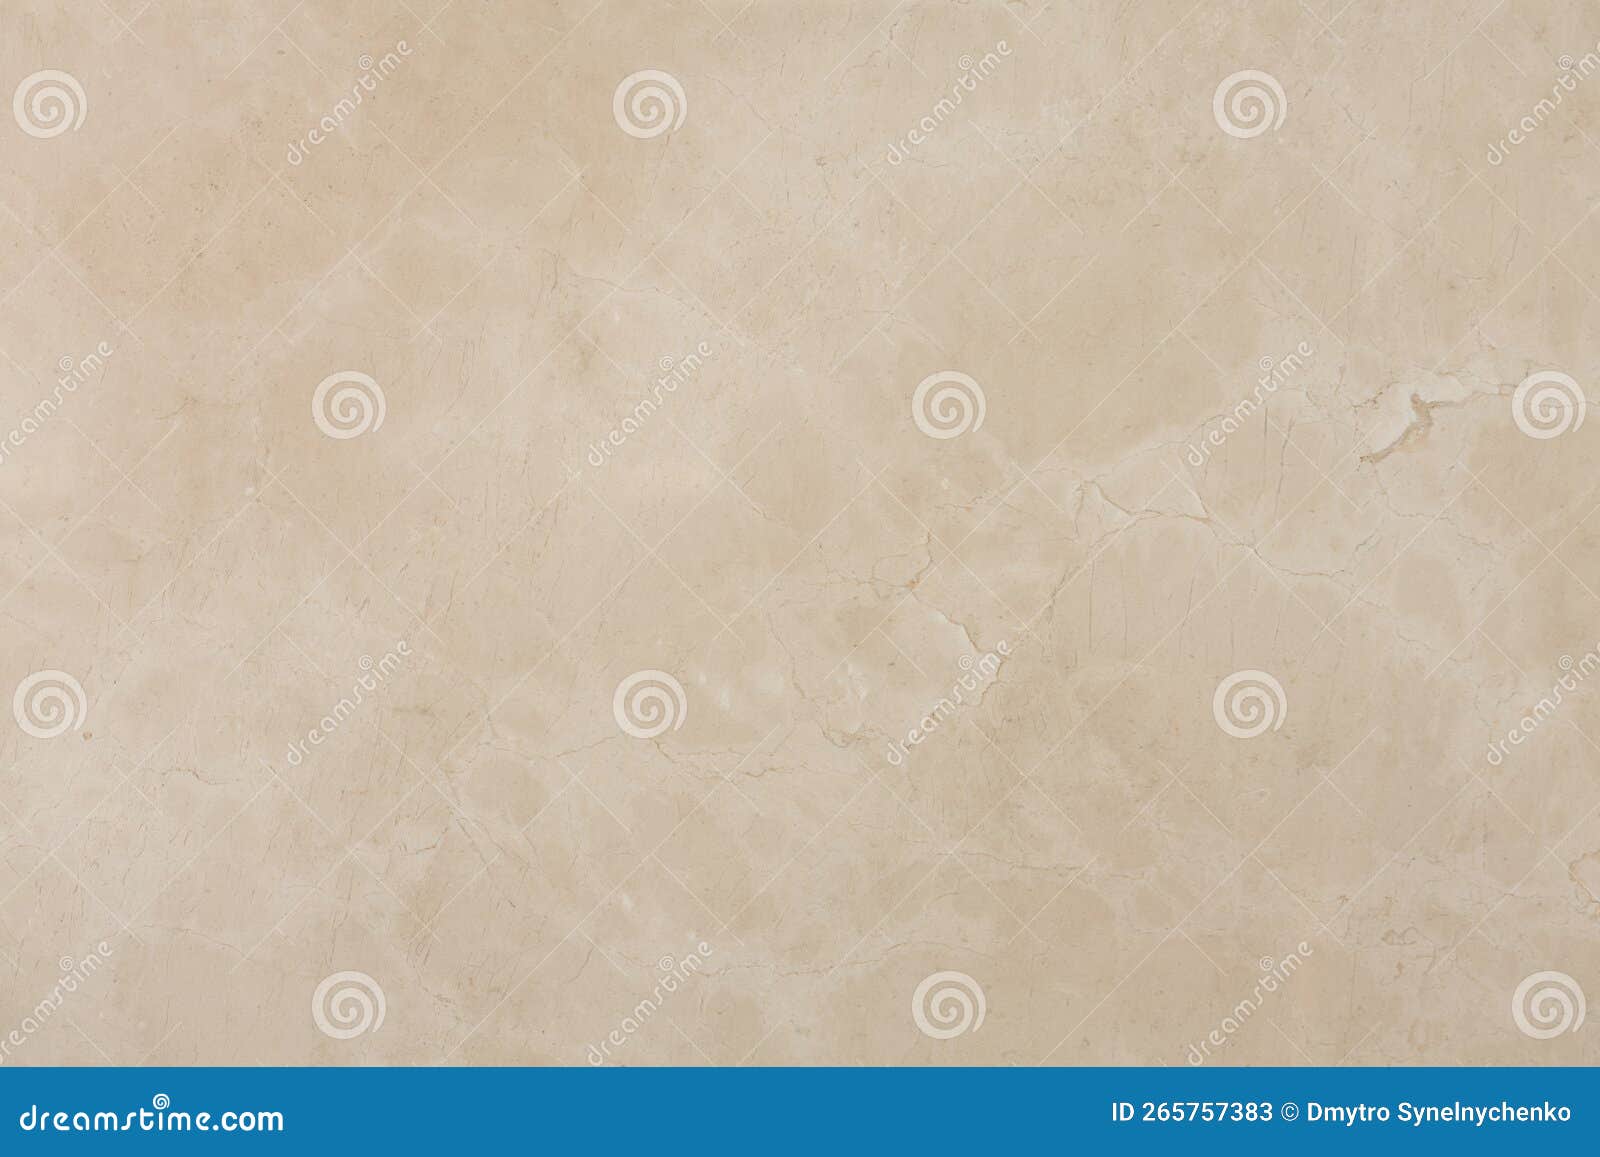 crema marfil, natural soft marble background, stone texture in light tone. slab photo. glossy beige pattern for exterior